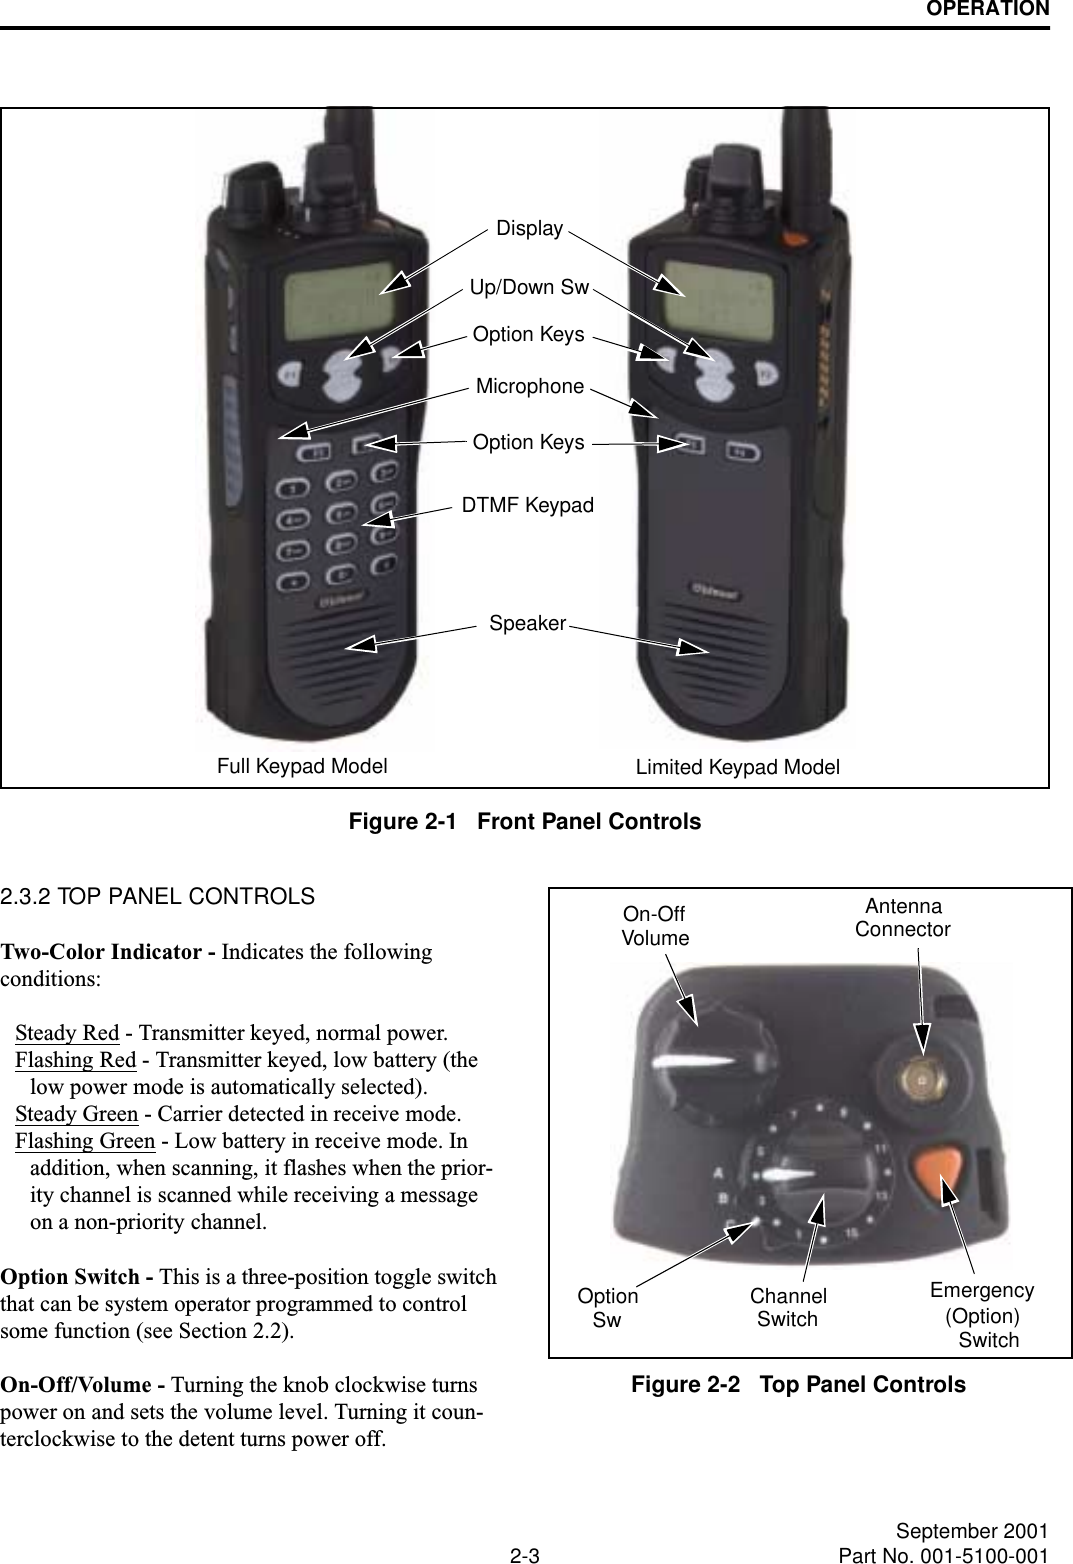 OPERATION2-3 September 2001Part No. 001-5100-001Figure 2-1   Front Panel ControlsSpeakerDisplayDTMF KeypadOption KeysMicrophoneFull Keypad Model Limited Keypad ModelUp/Down SwOption Keys2.3.2 TOP PANEL CONTROLSTwo-Color Indicator - Indicates the followingconditions:Steady Red - Transmitter keyed, normal power.Flashing Red - Transmitter keyed, low battery (the low power mode is automatically selected).Steady Green - Carrier detected in receive mode.Flashing Green - Low battery in receive mode. In addition, when scanning, it flashes when the prior-ity channel is scanned while receiving a message on a non-priority channel.Option Switch - This is a three-position toggle switch that can be system operator programmed to control some function (see Section 2.2). On-Off/Volume - Turning the knob clockwise turns power on and sets the volume level. Turning it coun-terclockwise to the detent turns power off.Figure 2-2   Top Panel ControlsEmergency(Option)On-OffVolumeChannelSwitchAntennaConnectorOptionSw Switch